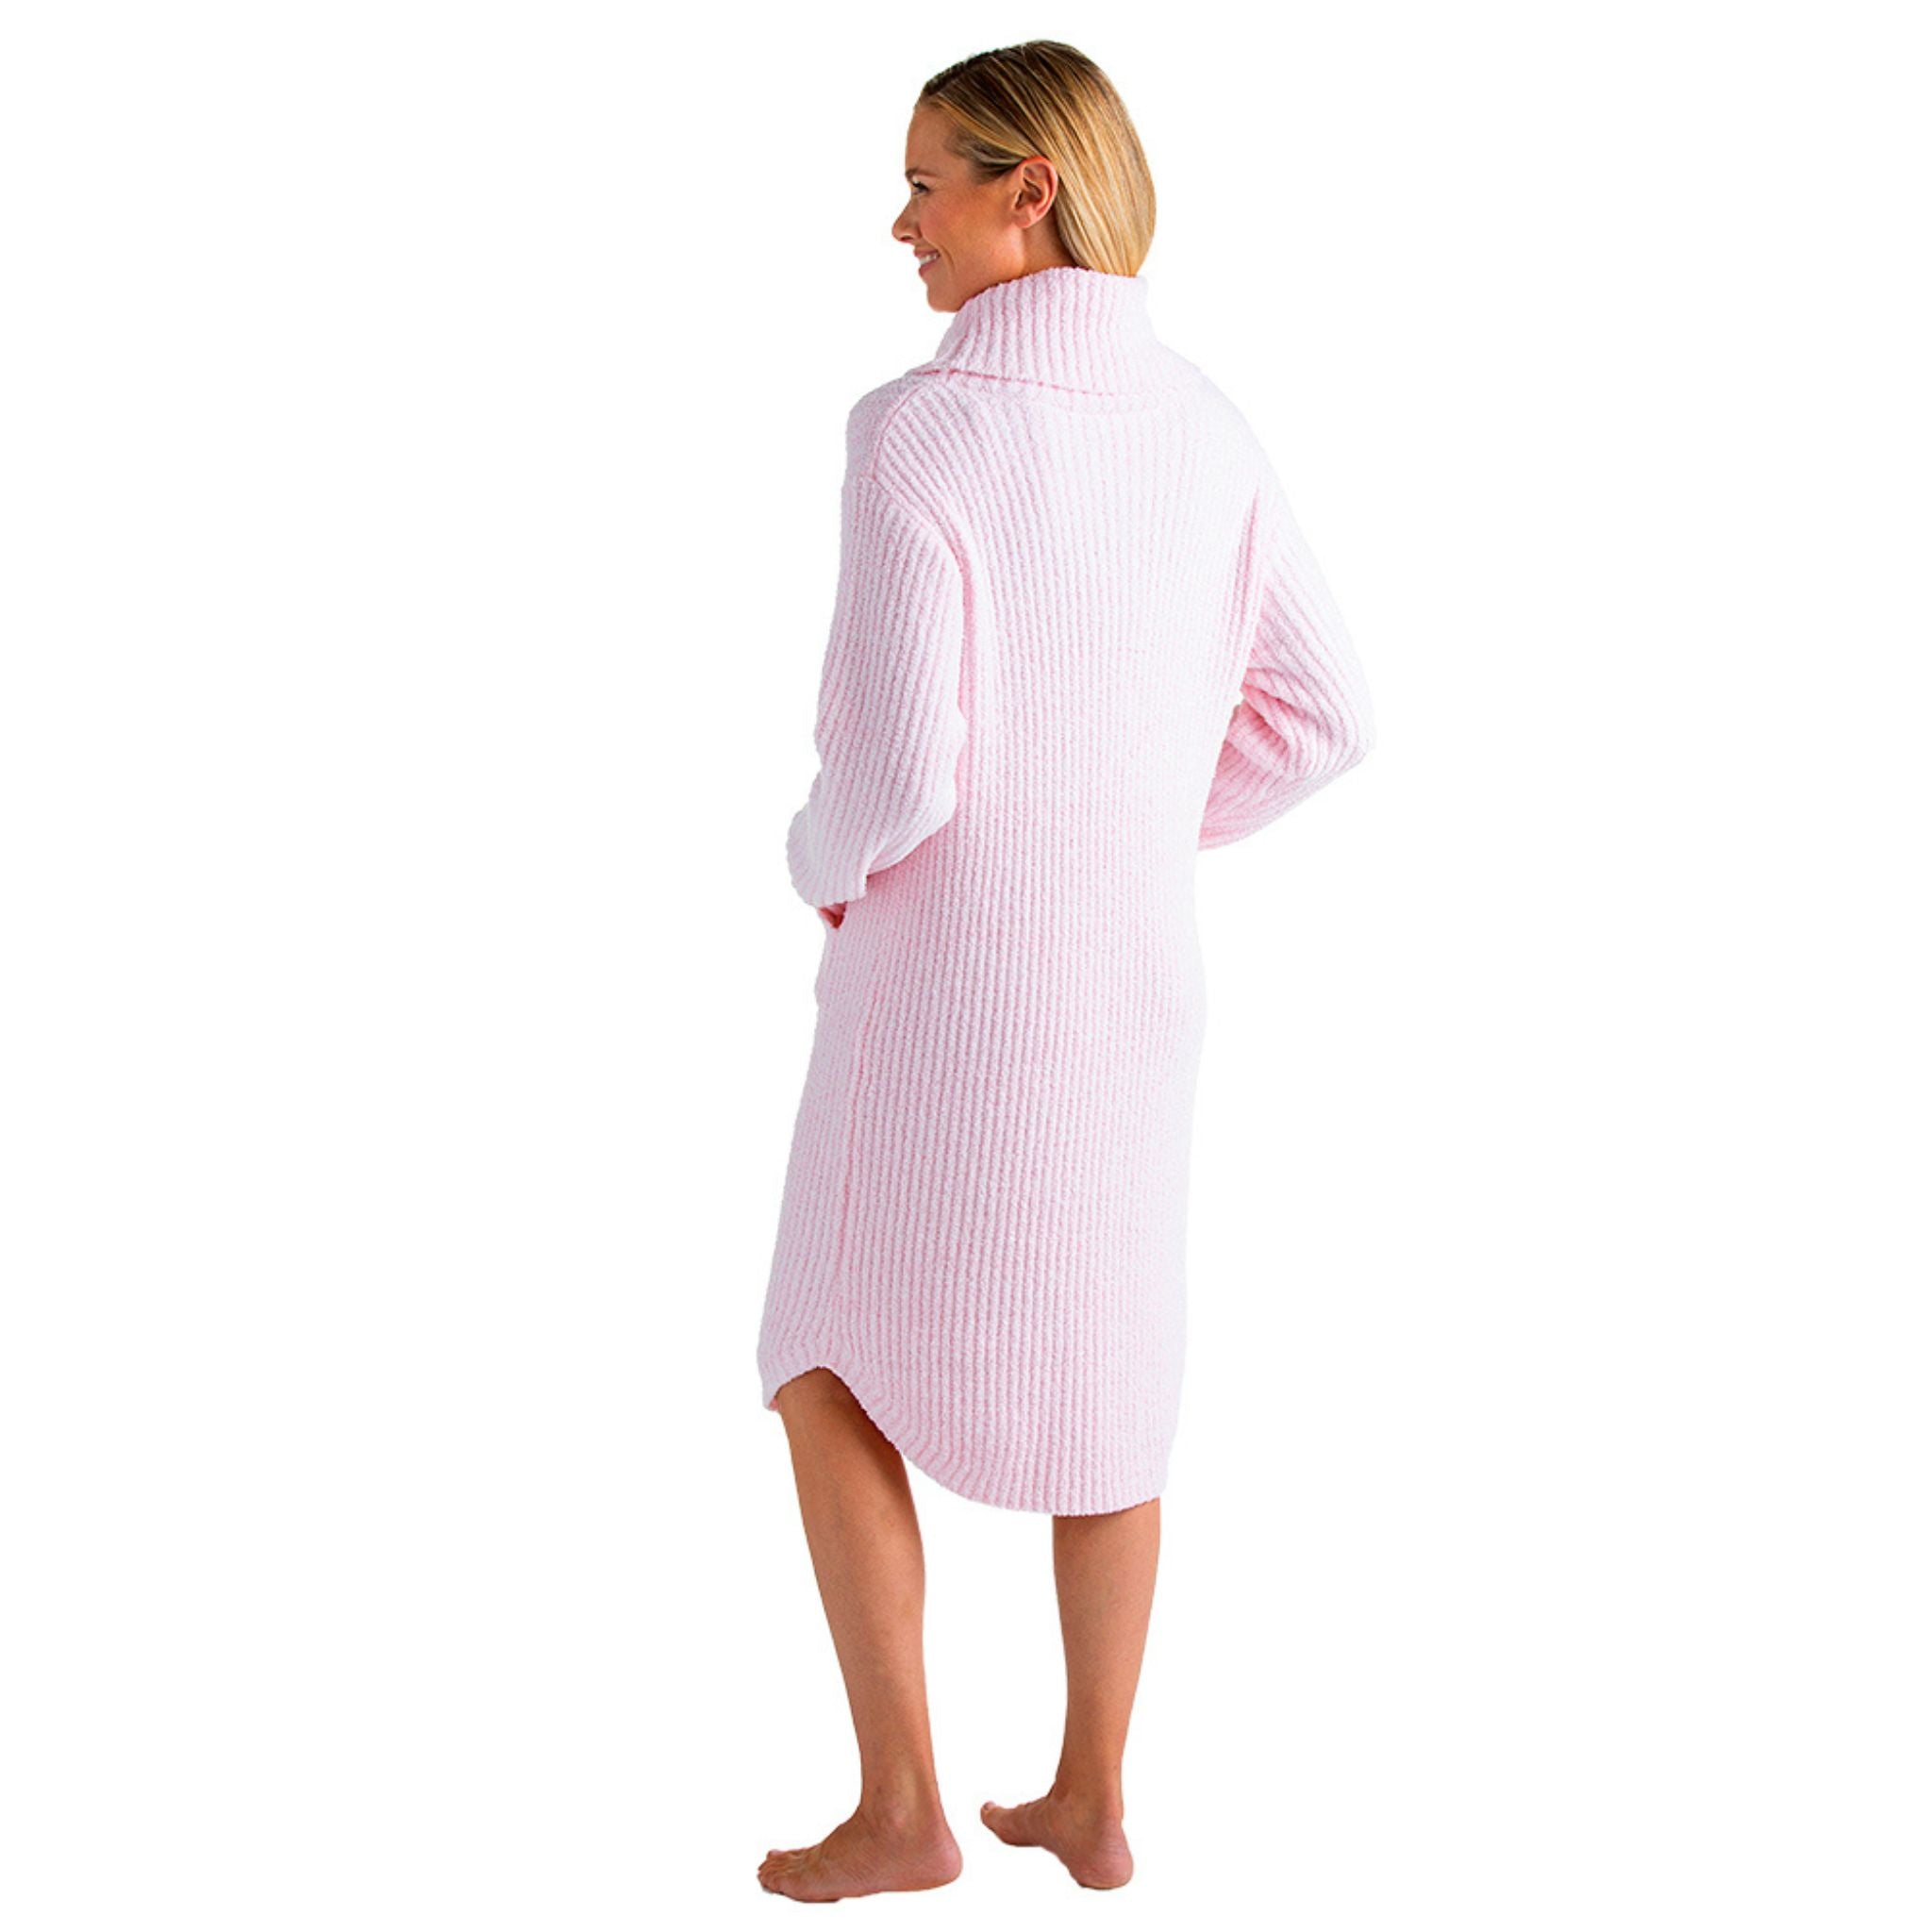 Reimagine your relaxation with Softies Women’s Marshmallow Slouch Turtleneck Lounger. This pretty piece is perfect for days when you want to curl up and binge-watch your favorite show or pick up the kids and head to practice. Its slouchy turtleneck, kangaroo pocket and heathered, ribbed knit fabric are flattering and fabulously soft. This year-round must-have definitely feels as good as it looks.